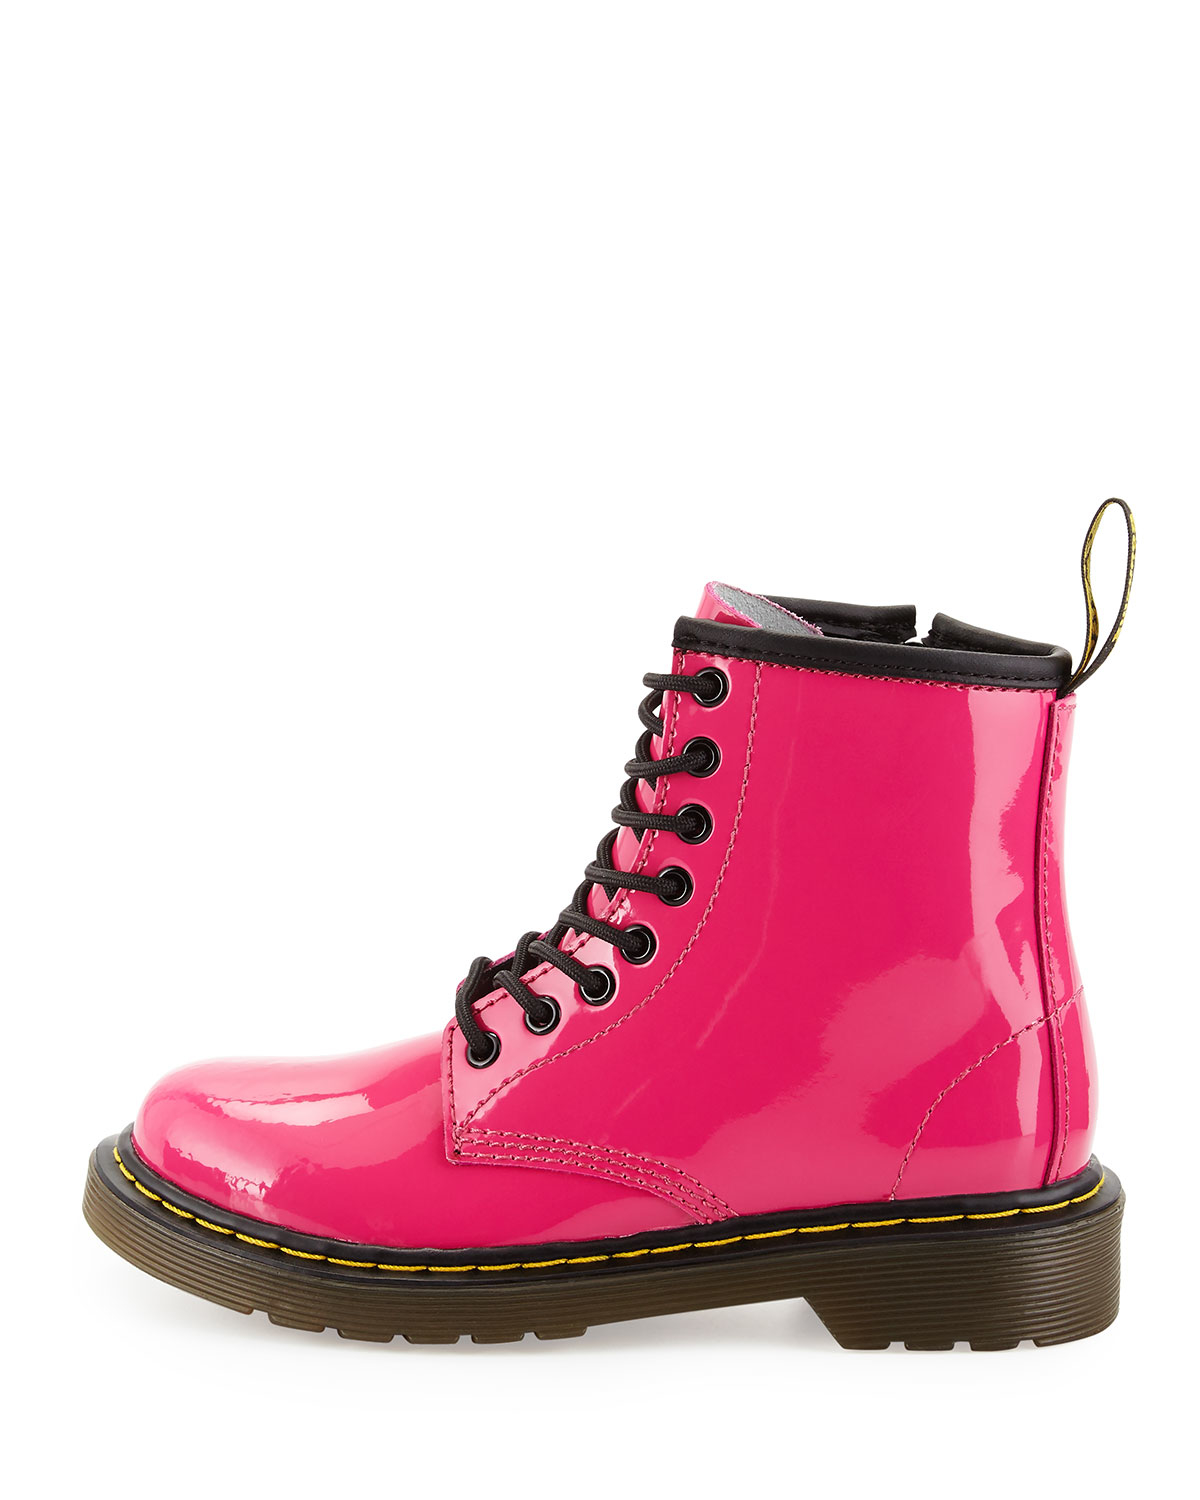 Lyst - Dr. Martens Delaney Patent-Leather Military Boots in Pink